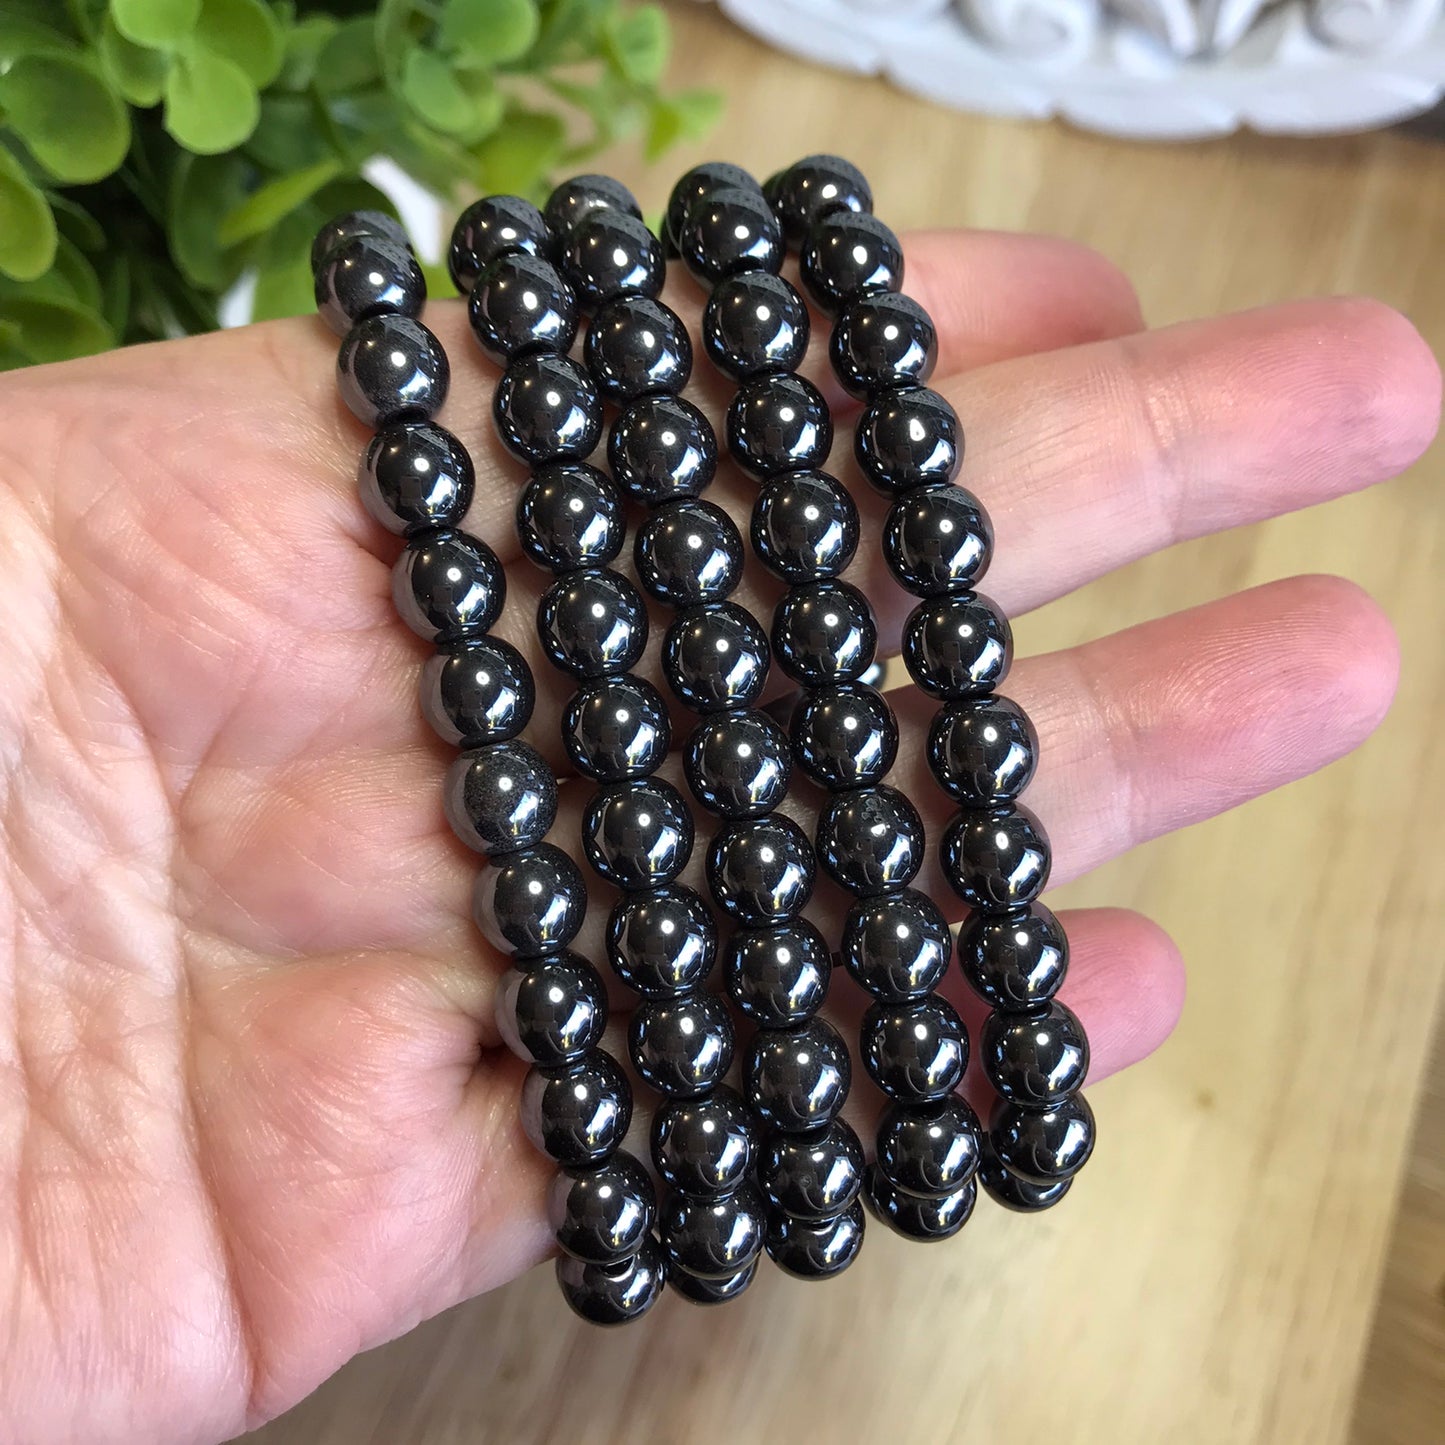 Hematite Bead Bracelets - Willpower, Protection and Anxiety